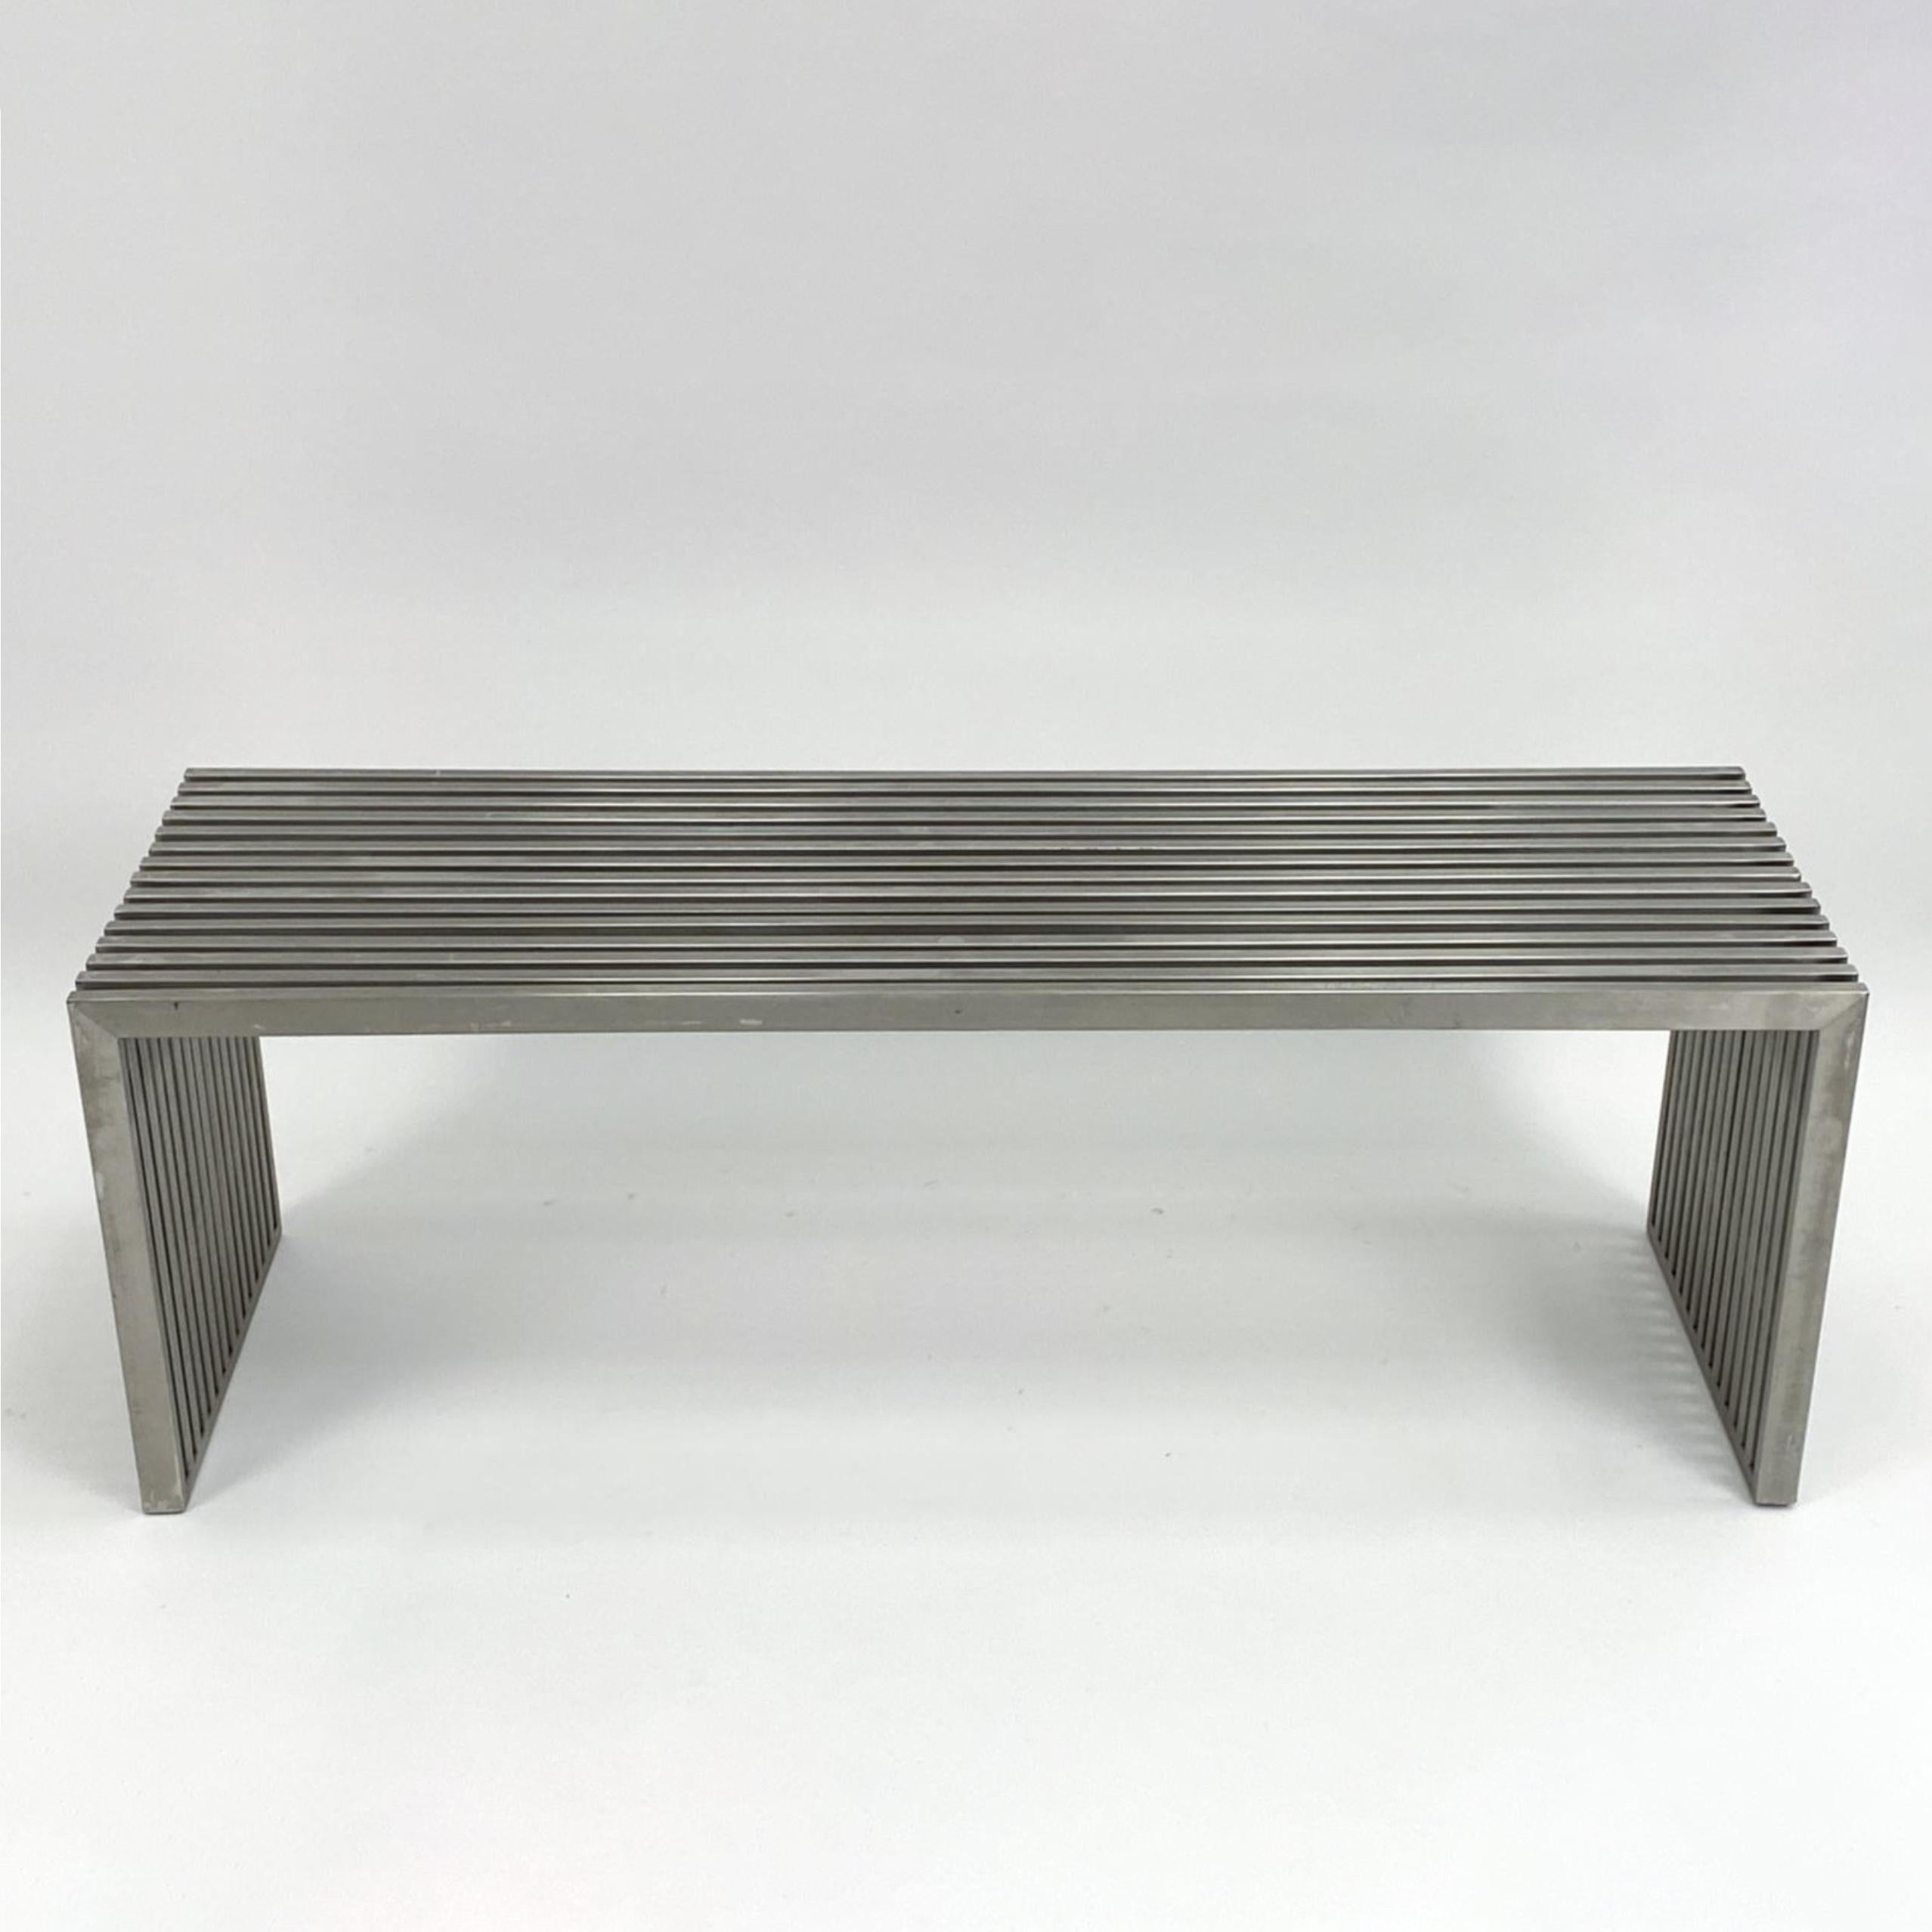 Sleek modernist metal slat bench in the manner of Milo Baughman. Chrome plated metal with lucite spacers. The length of this bench measure 47